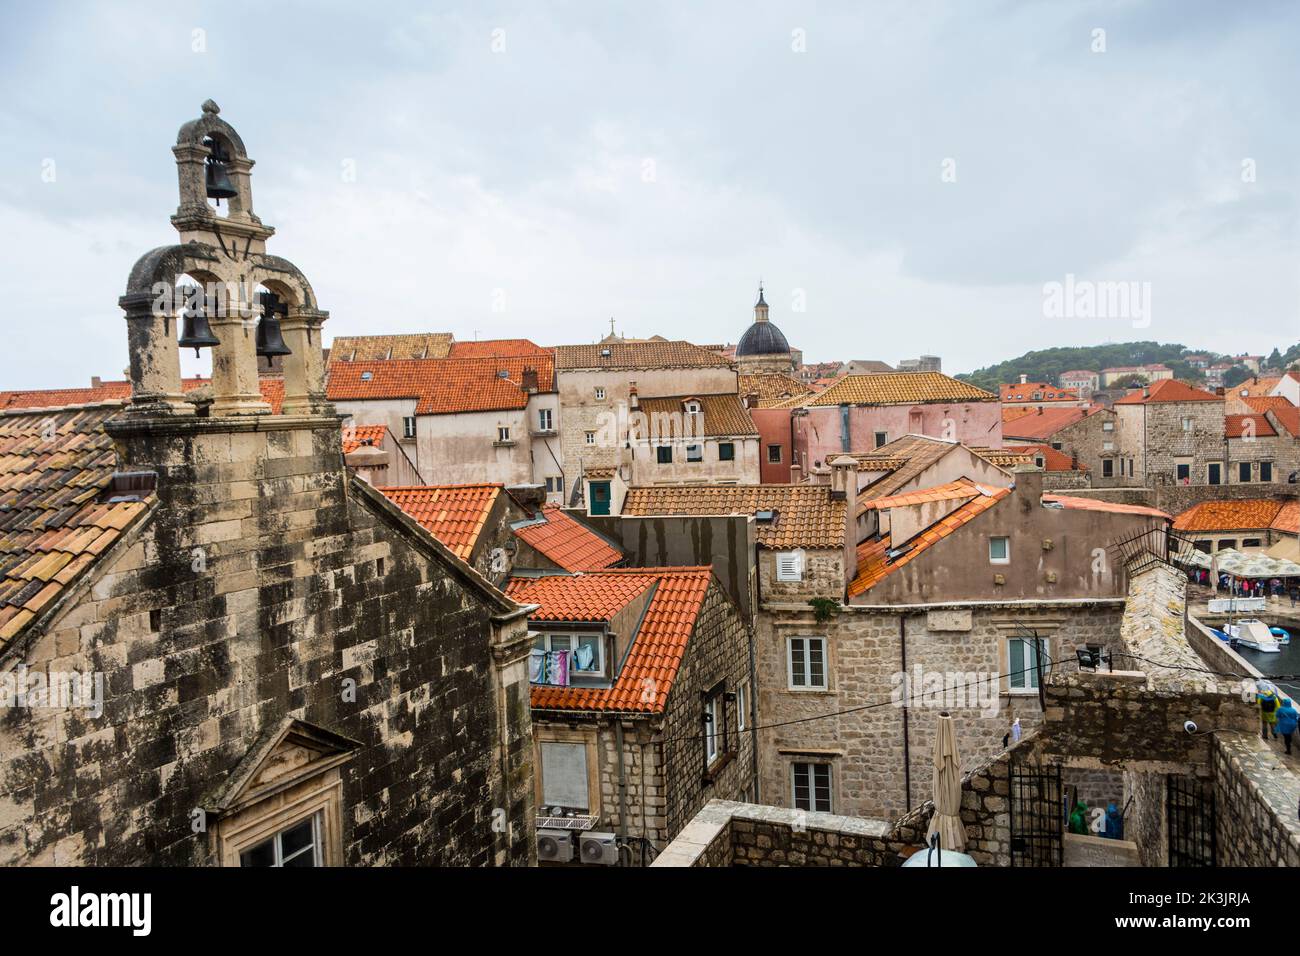 Overview of the old walled city of Dubrovnik, Croatia. Stock Photo